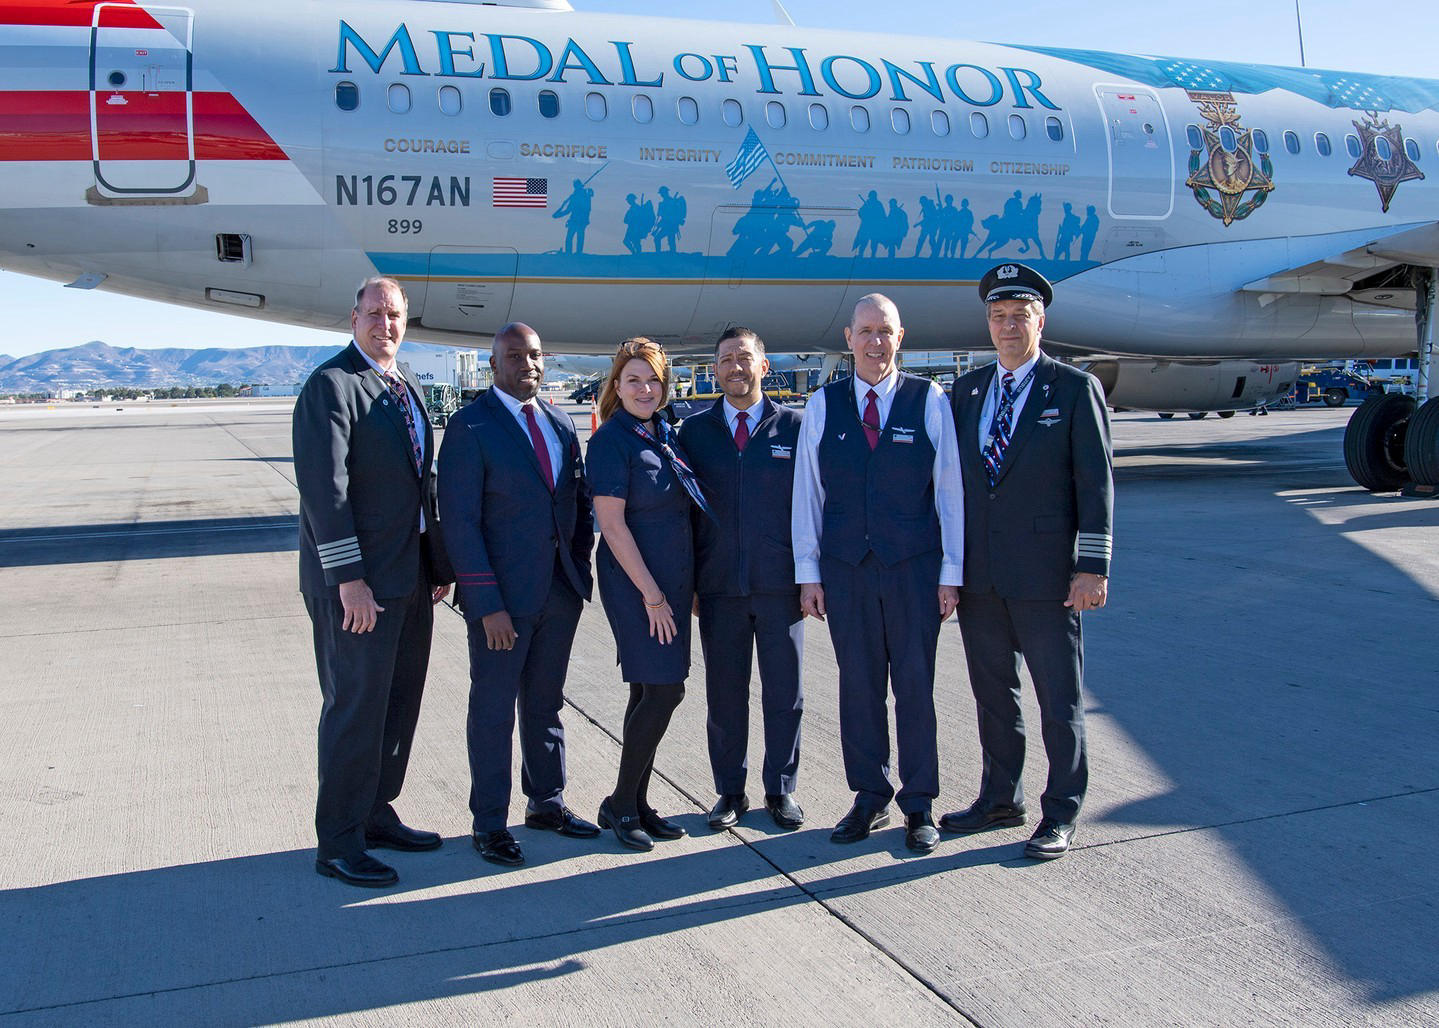 American Airlines - Supporting the military community and honoring our nation’s heroes is engrained